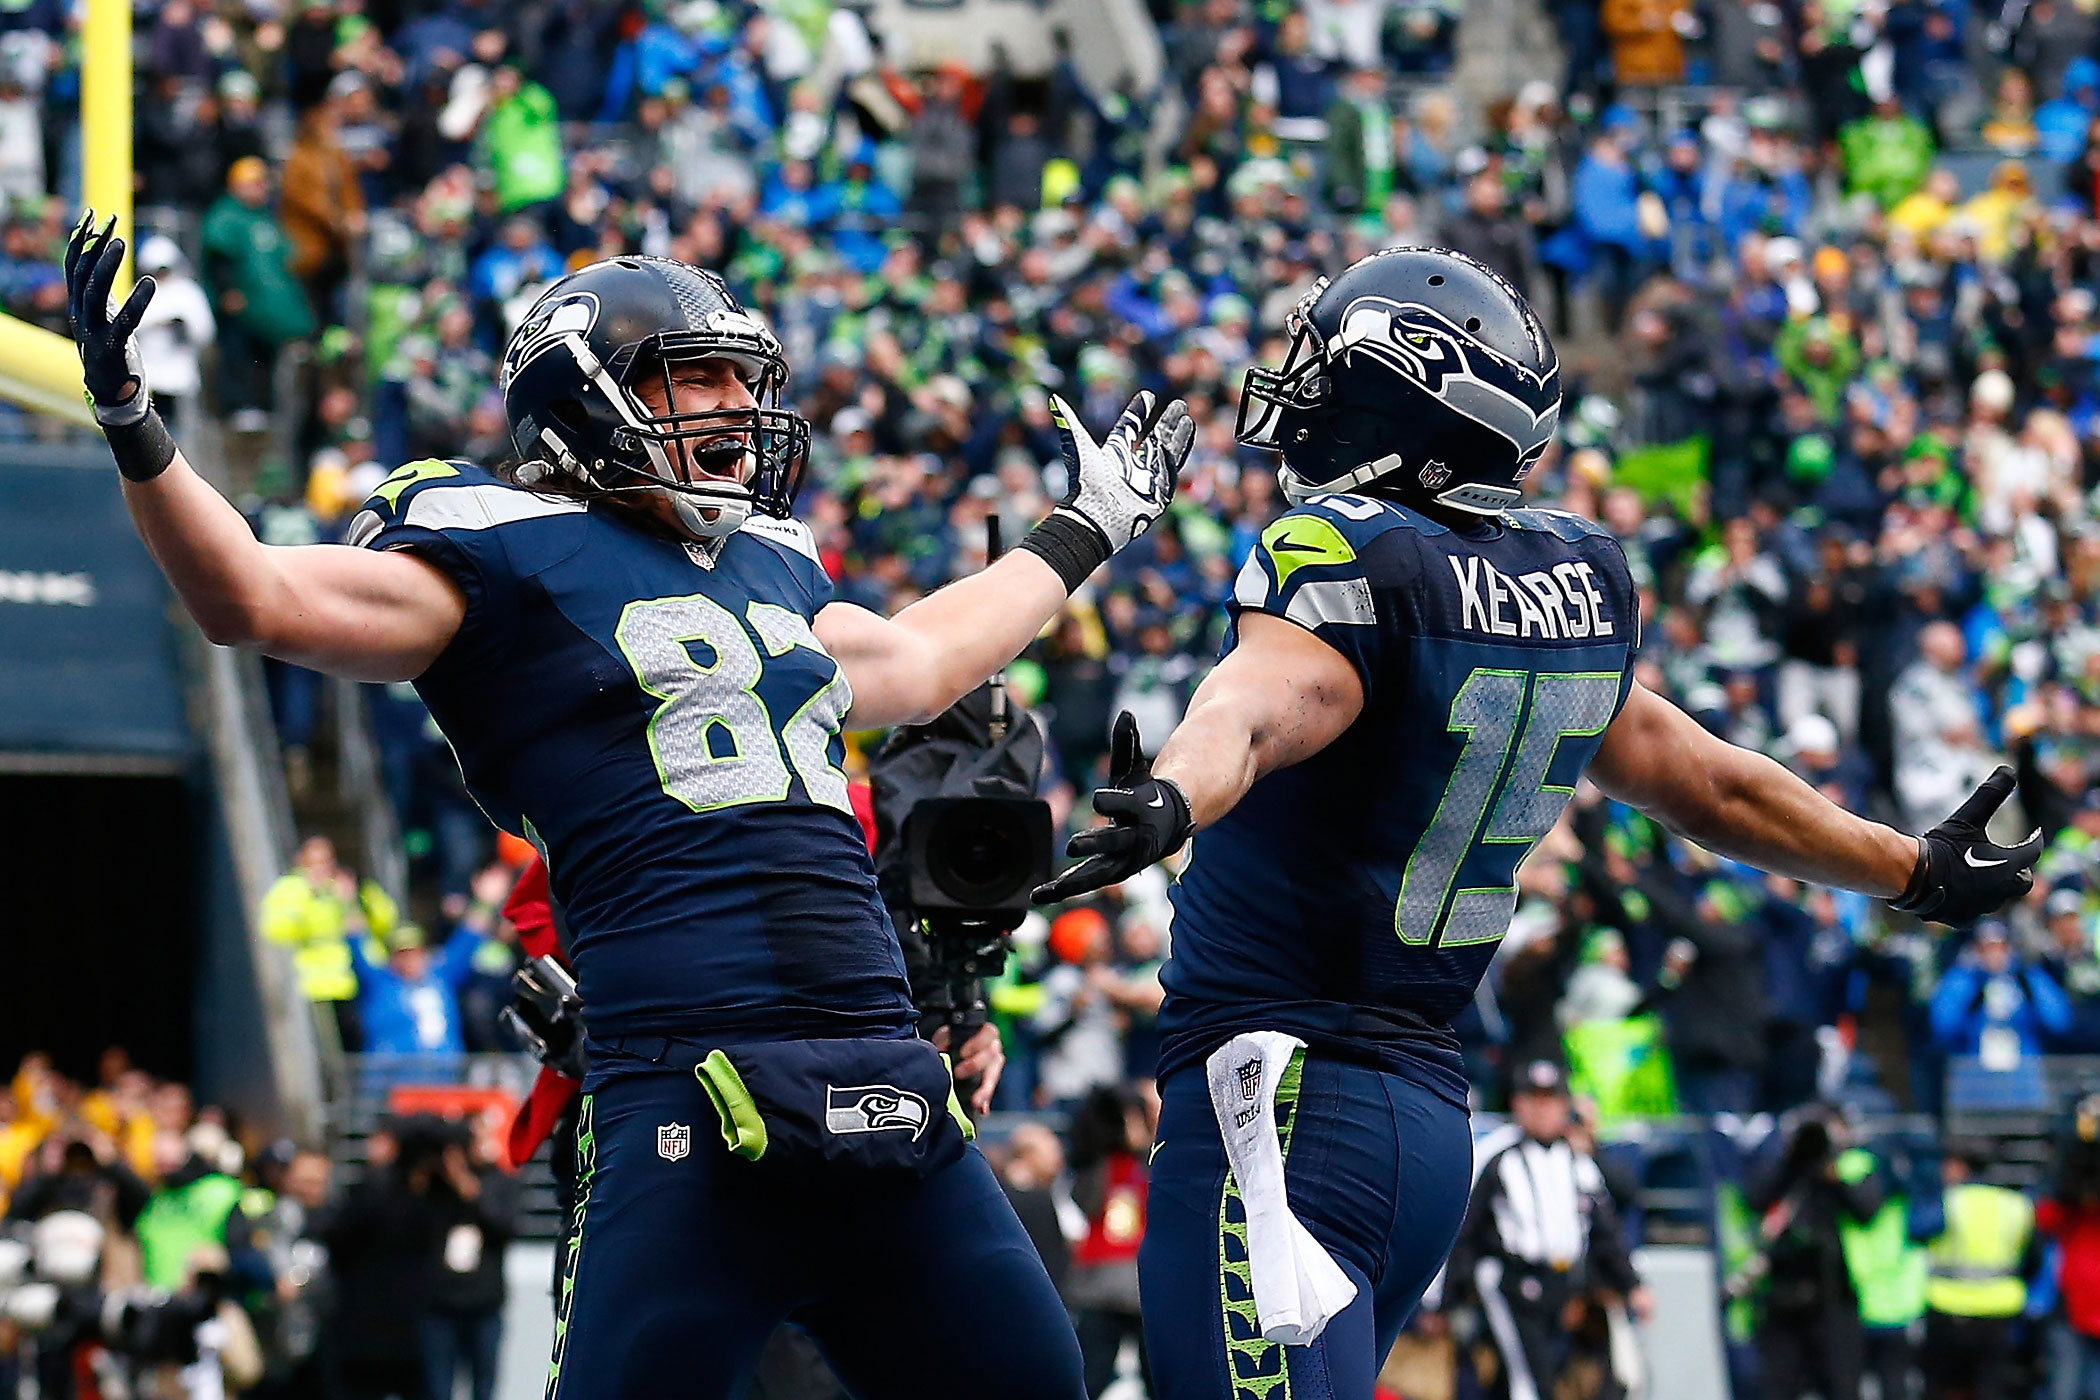 Luke Willson of the Seattle Seahawks celebrates after scoring on a two point conversion during the fourth quarter of the 2015 NFC Championship game against the Green Bay Packers at CenturyLink Field on Jan. 18, 2015 in Seattle, Wash. (Tom Pennington—Getty Images)